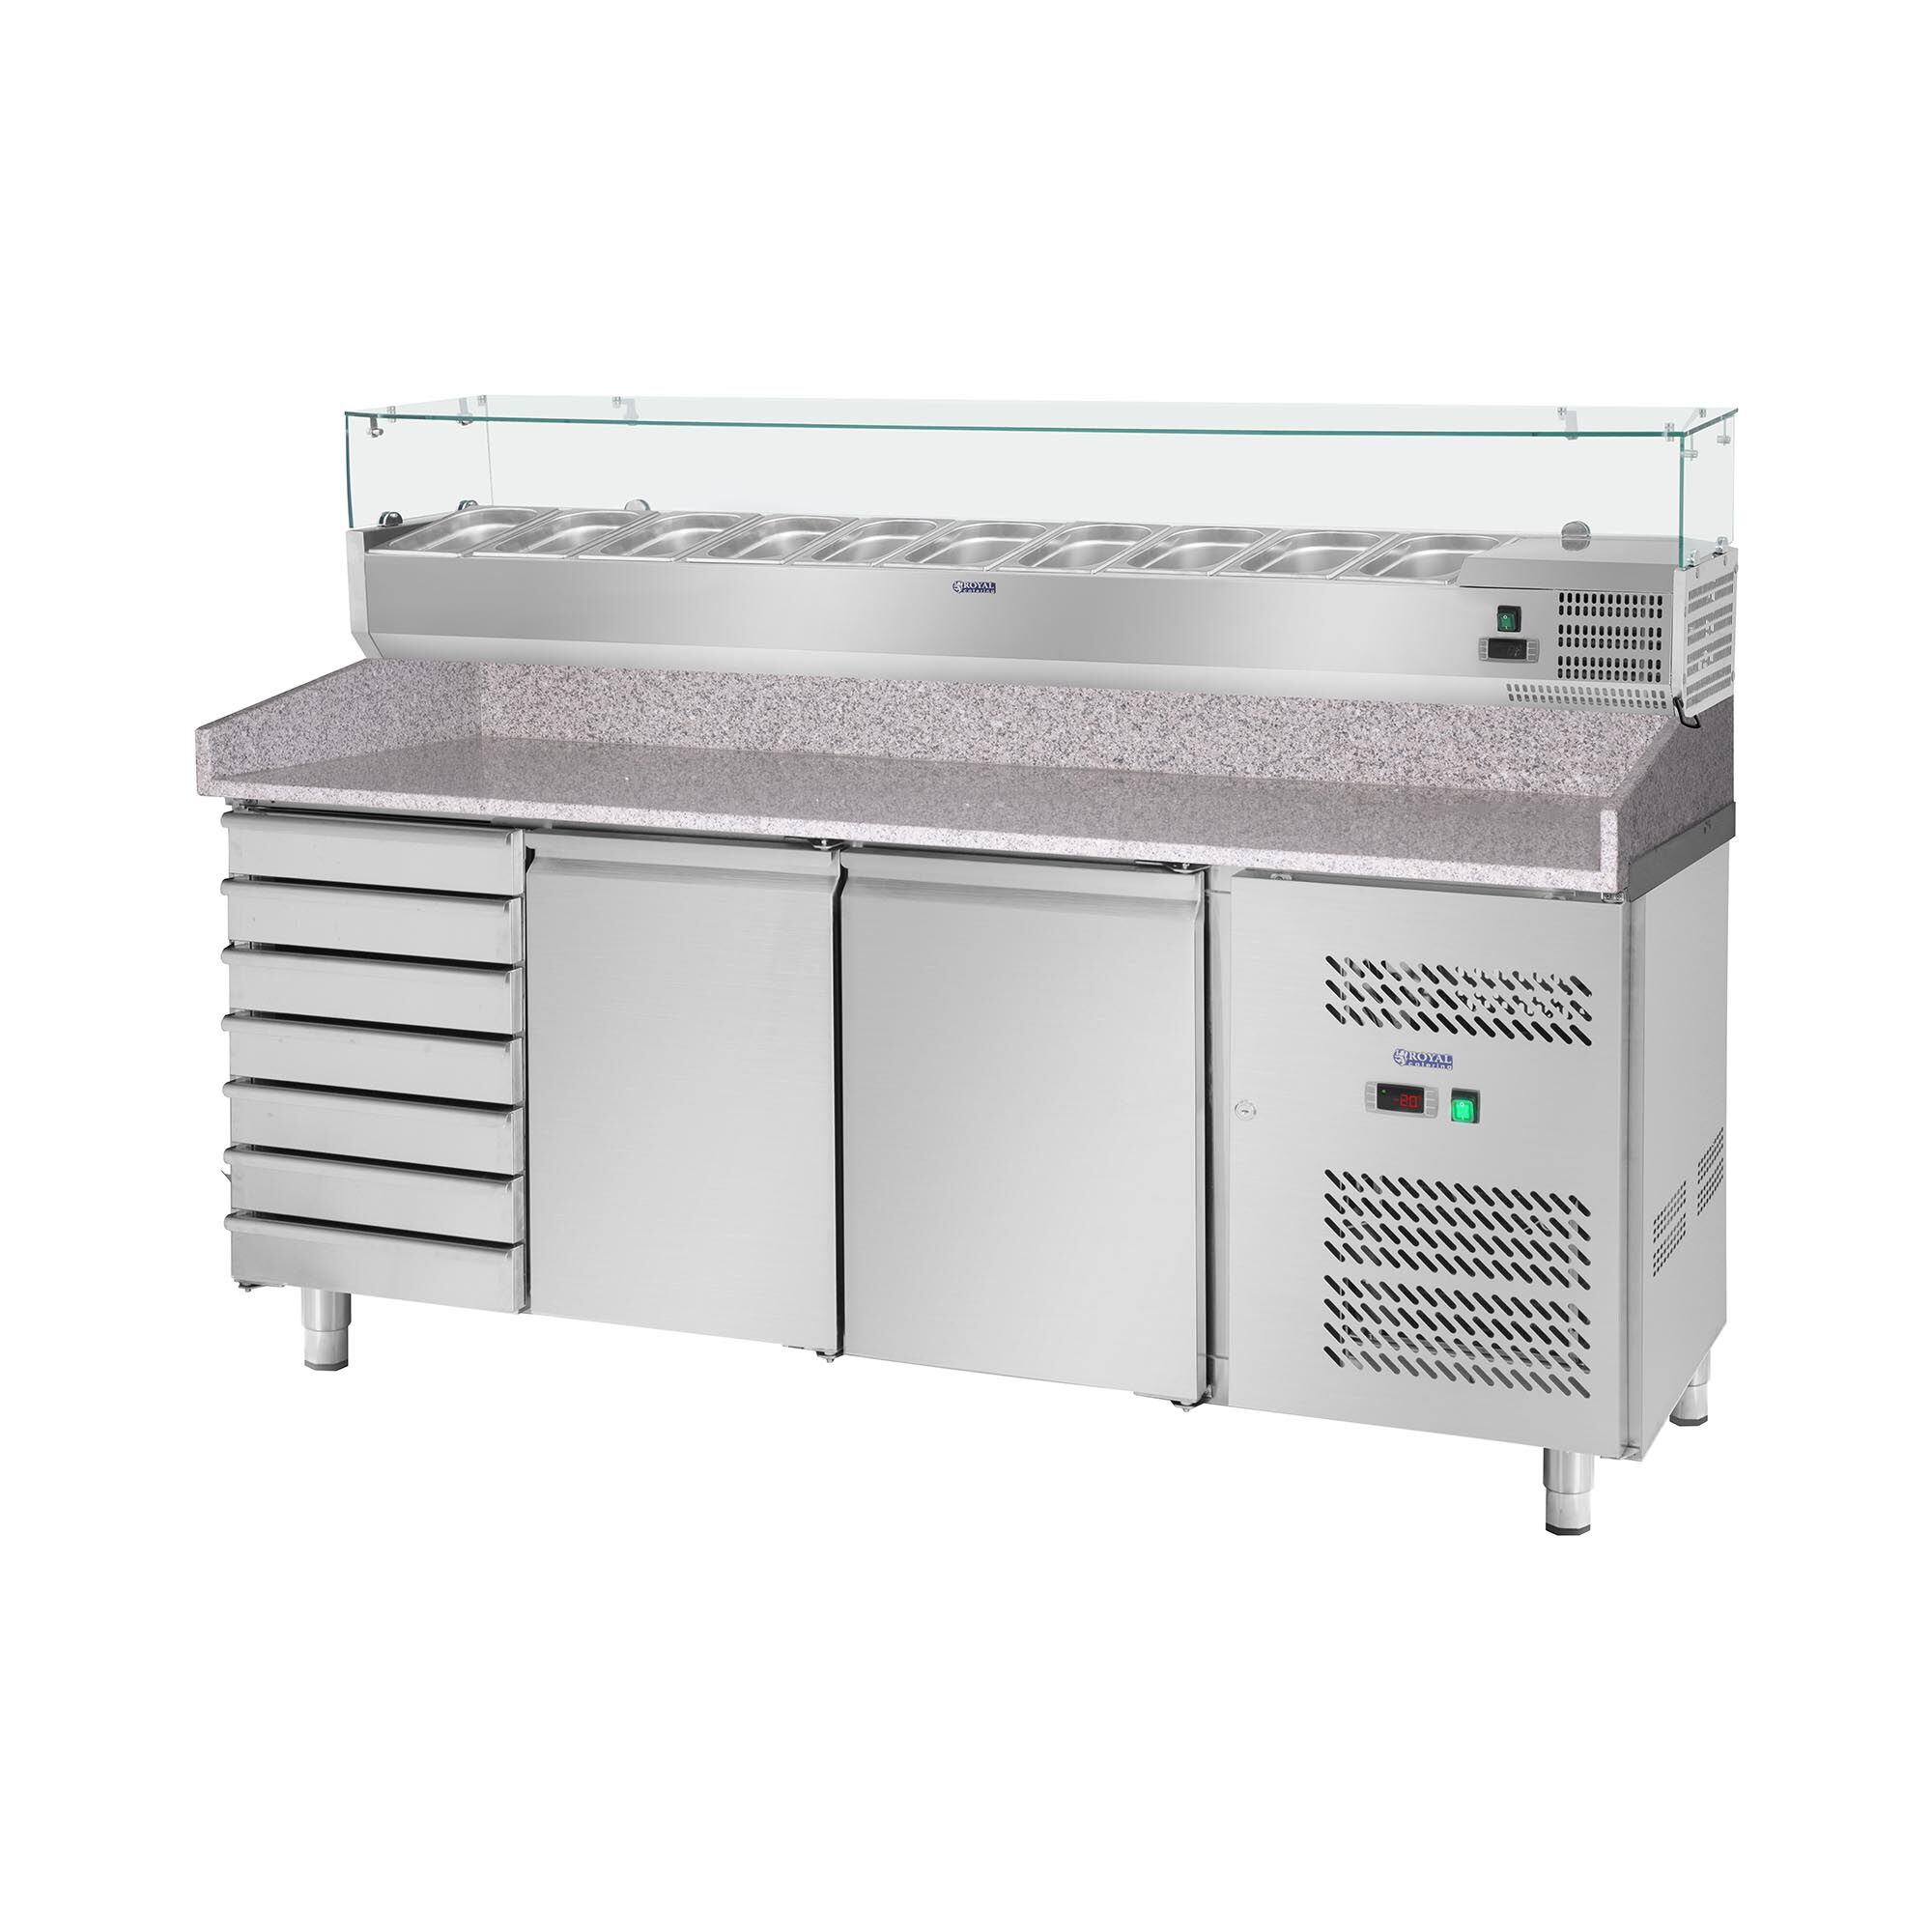 Royal Catering Cooling Table - Cooling Attachment - 702 L - Granite Counter - 2 Doors